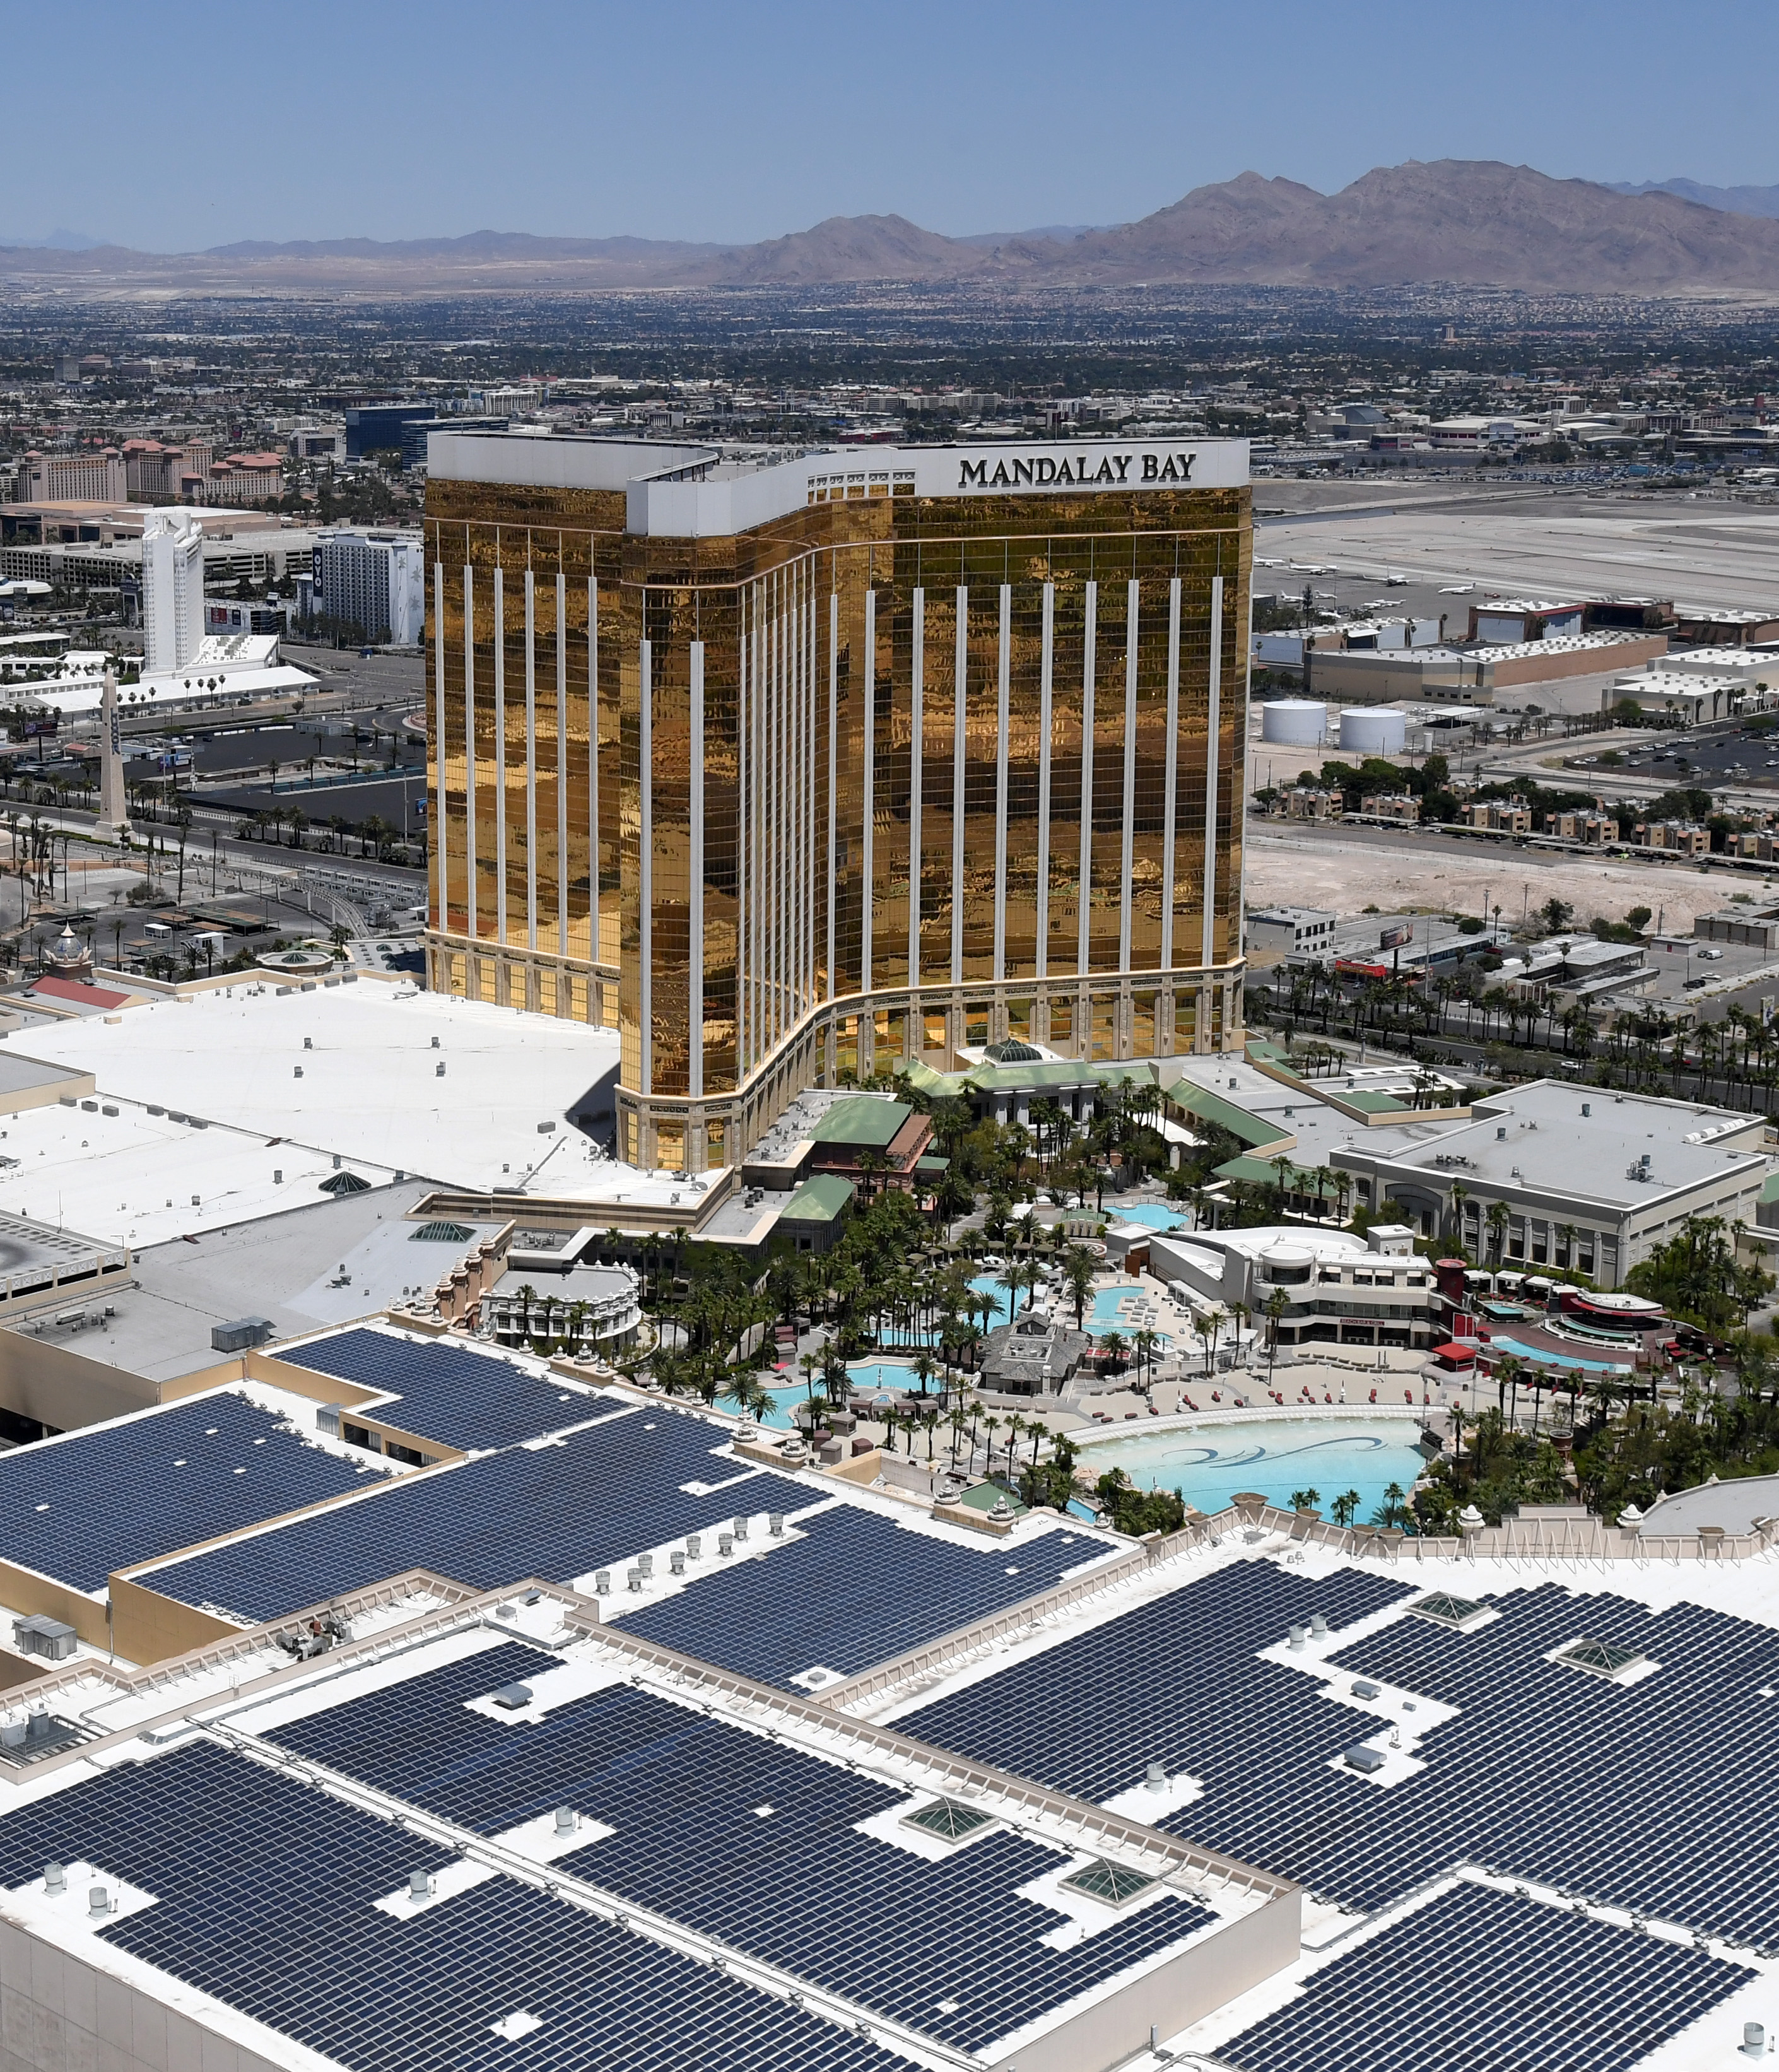 Mandalay Bay's expanded rooftop solar array is the largest in the nation